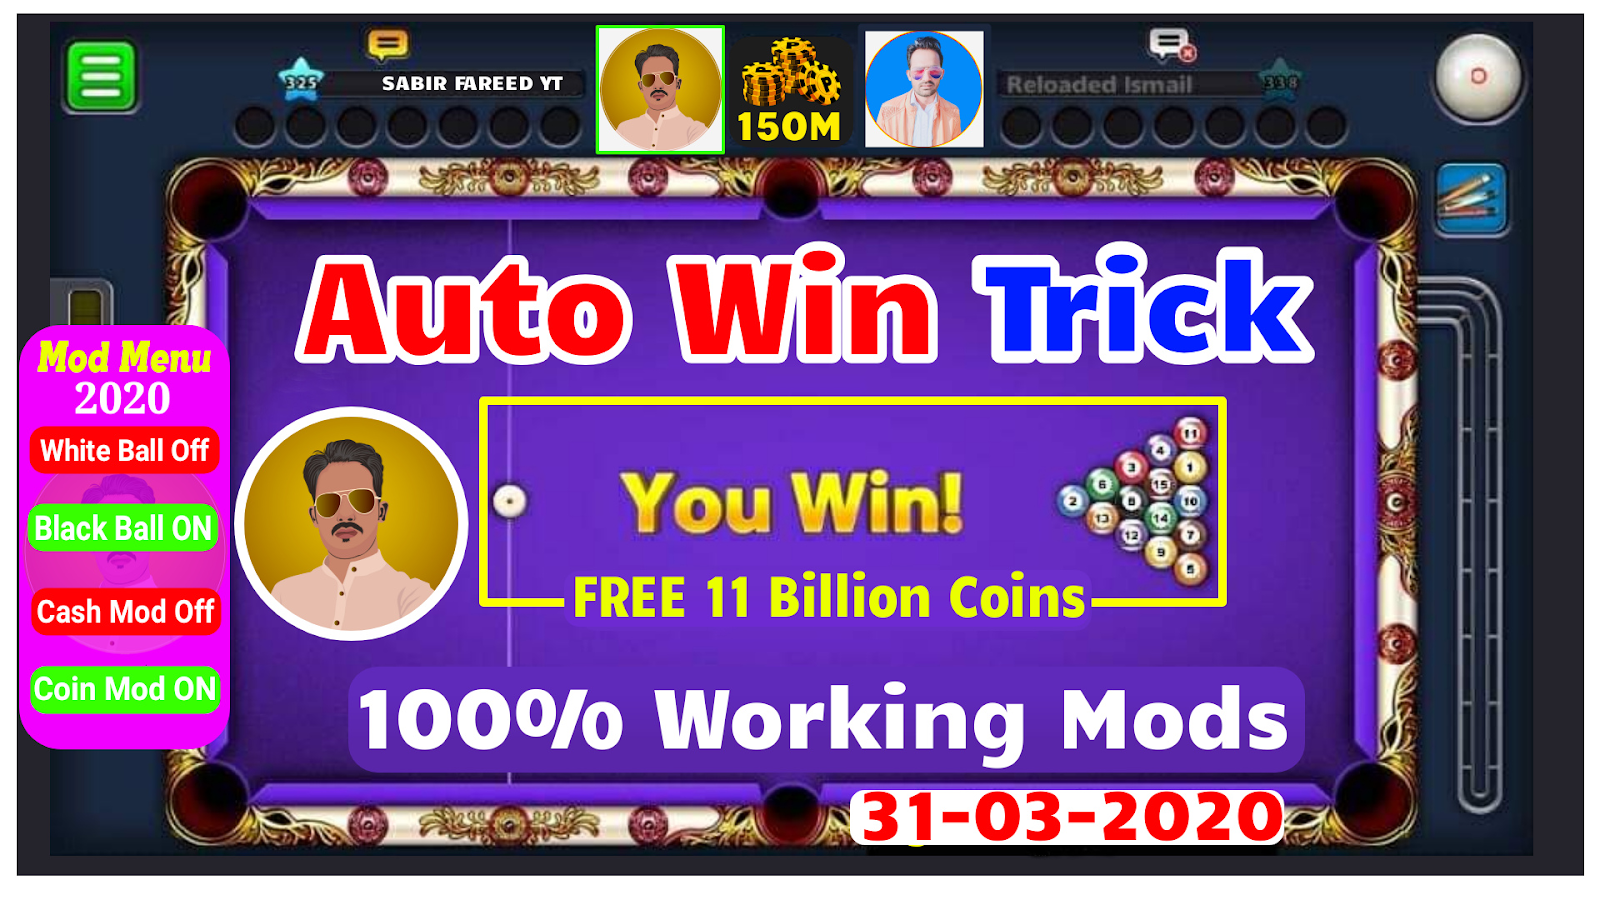 Autowin New Latest Mod Make Unlimited Coins By Sabir Fareed